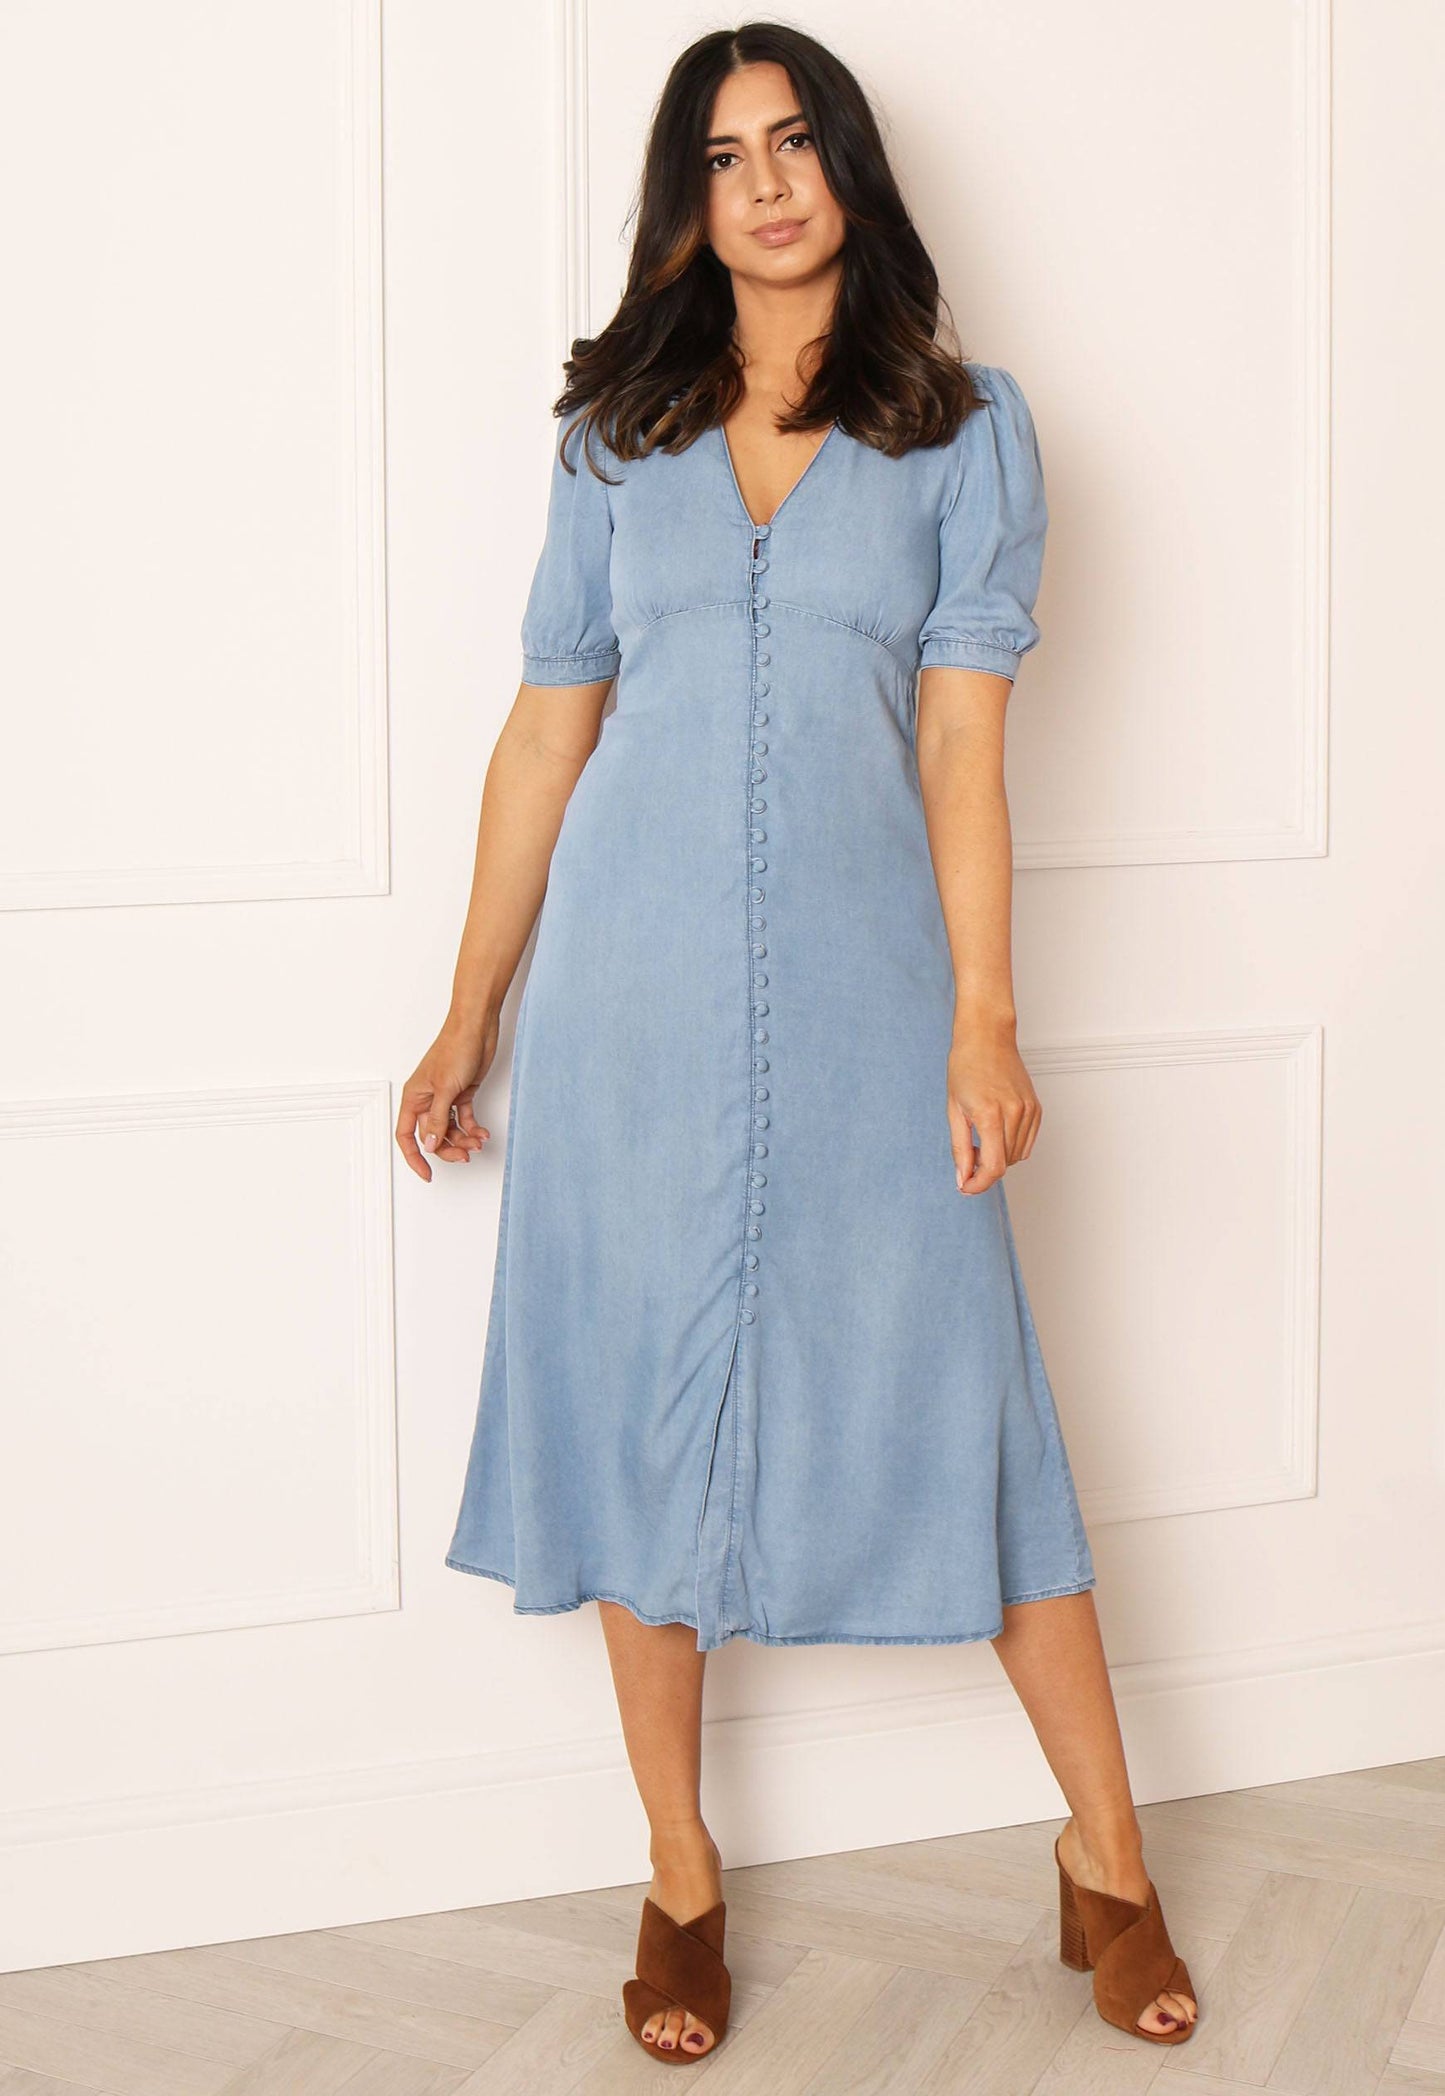 ONLY Daisy Tencel Denim Button Midi Tea Dress in Blue - One Nation Clothing